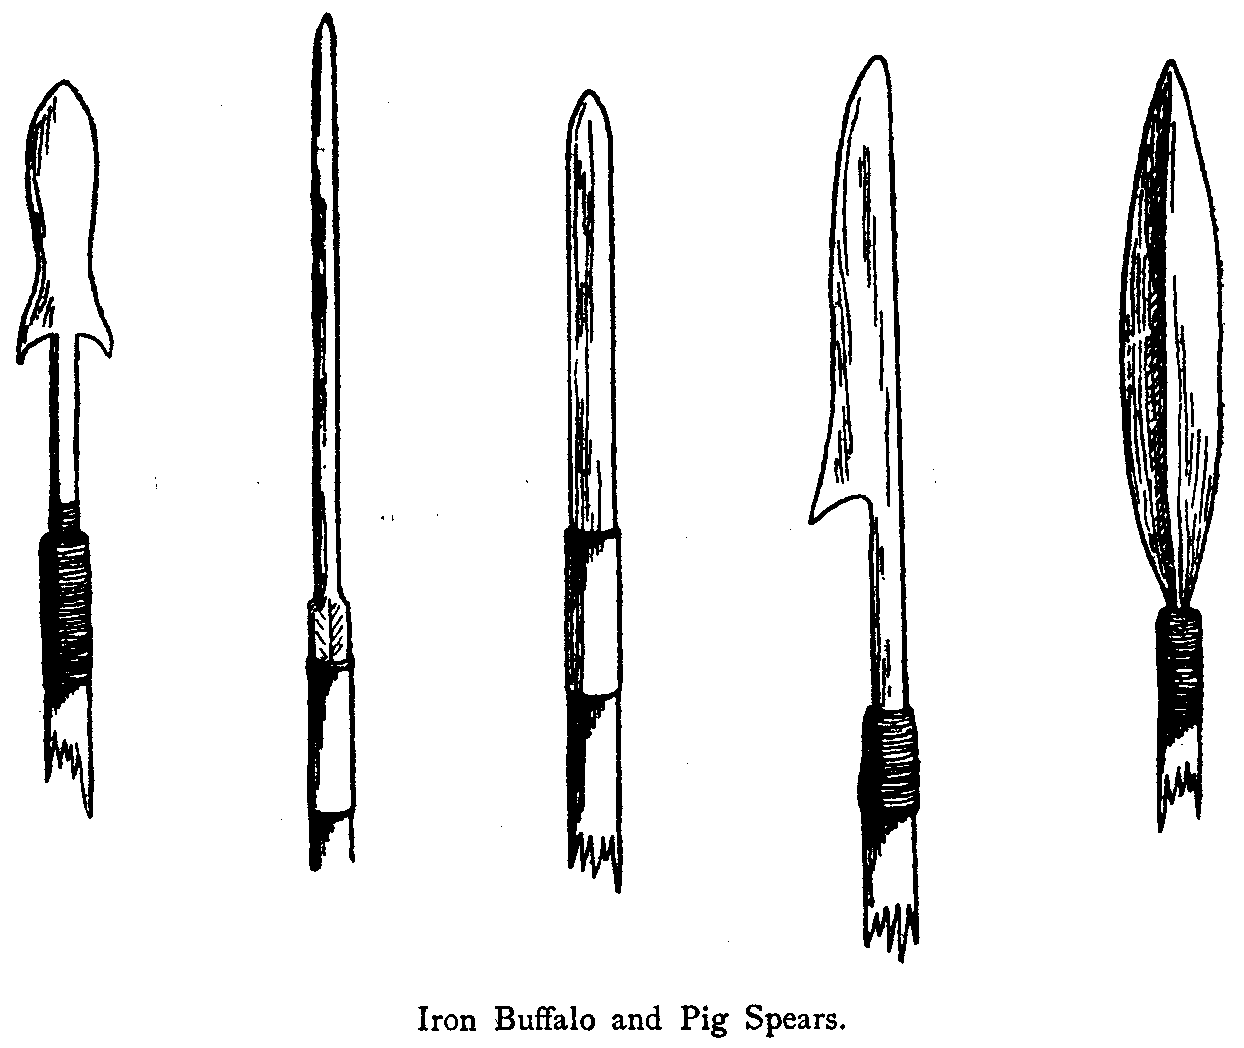 Iron Buffalo and Pig Spears.